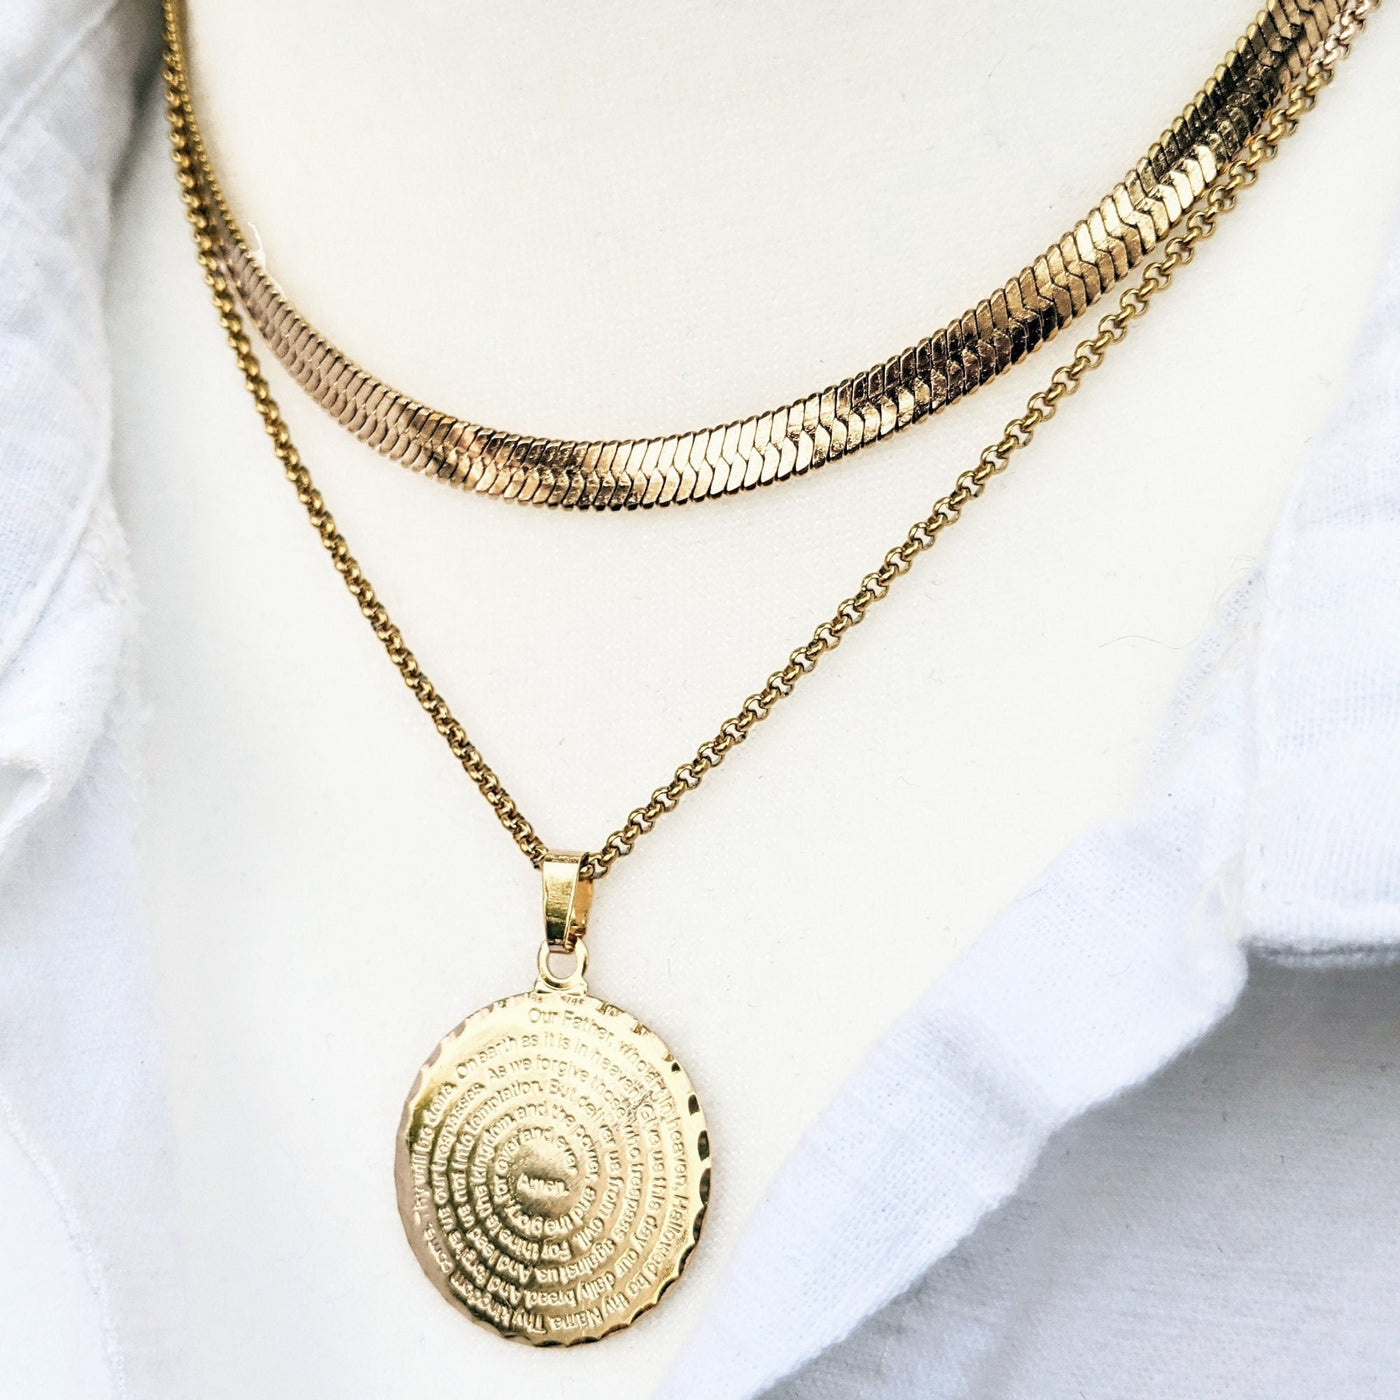 24kt Gold Filled Medallion - The Lord's Prayer Necklace.